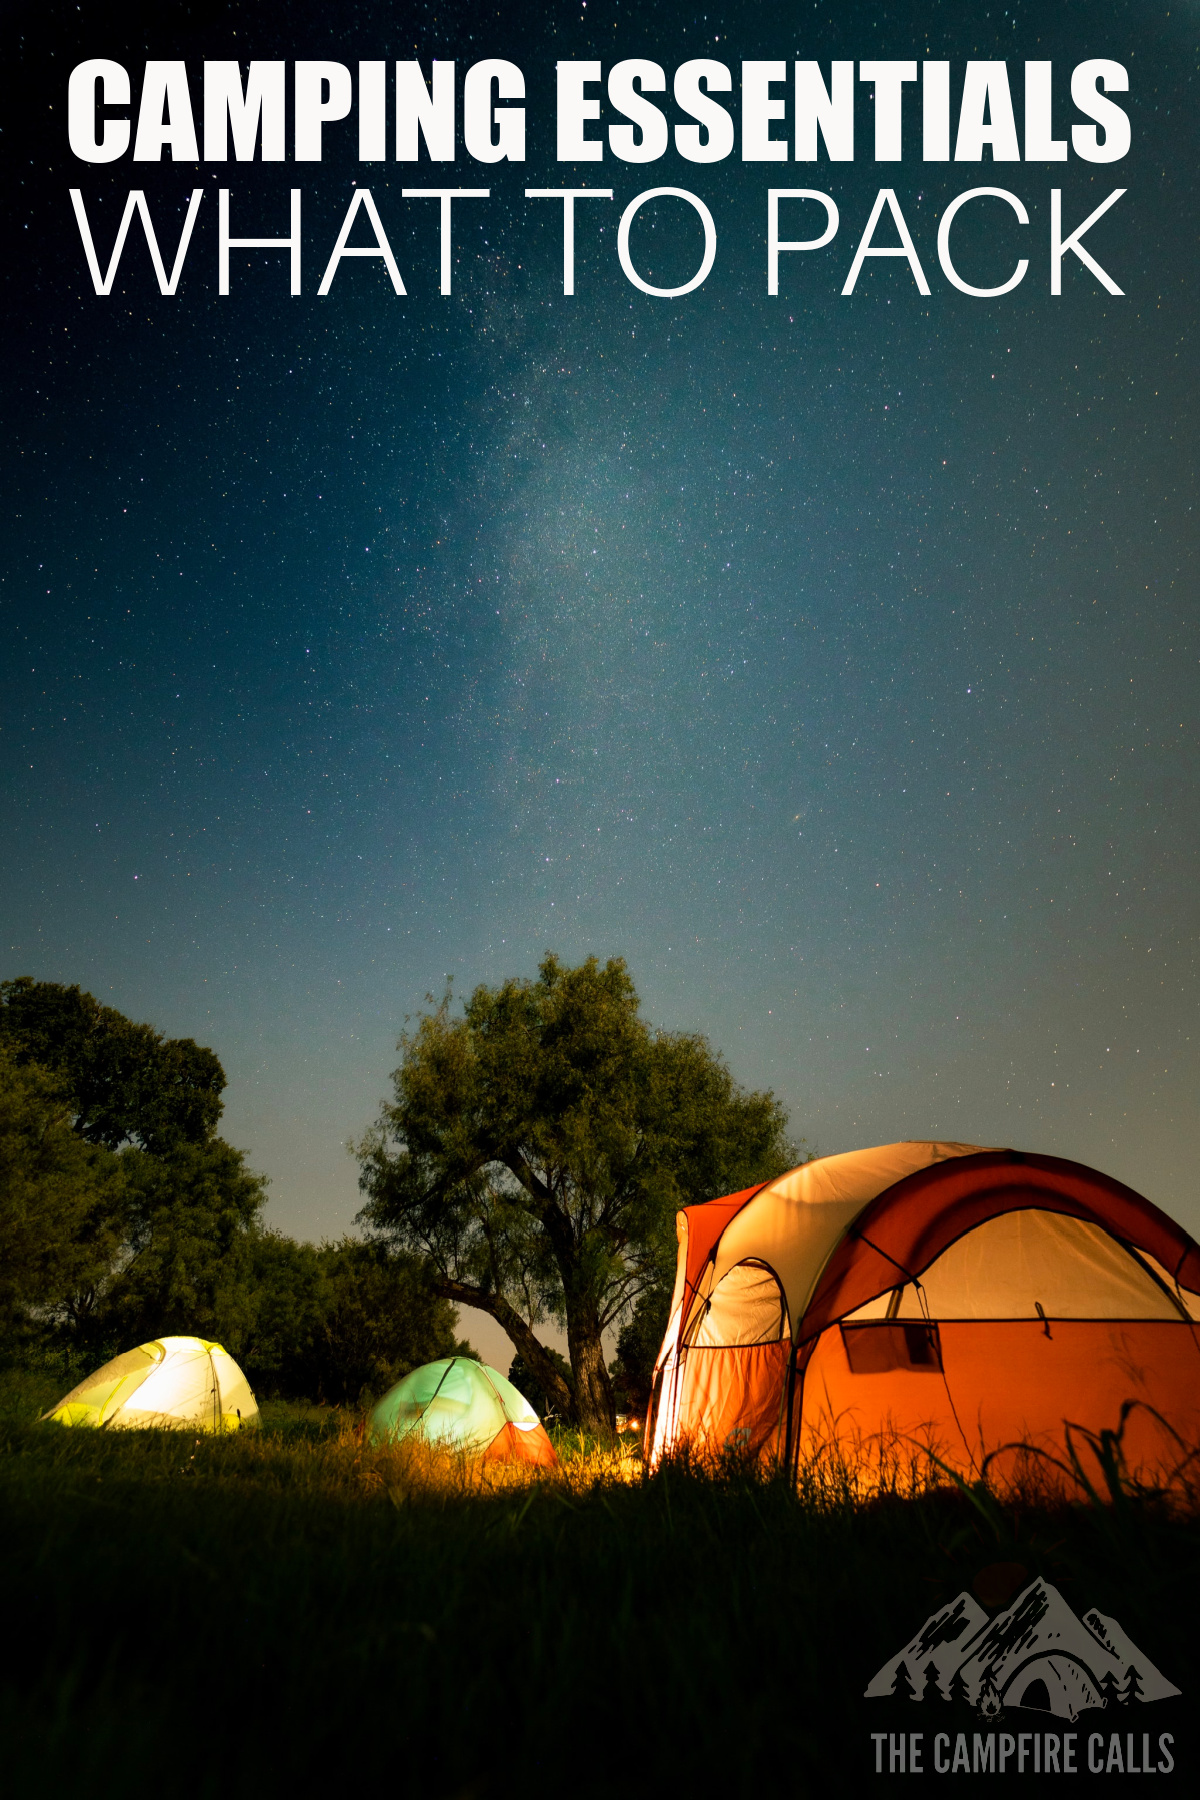 What to Pack for Camping: Camping Essentials